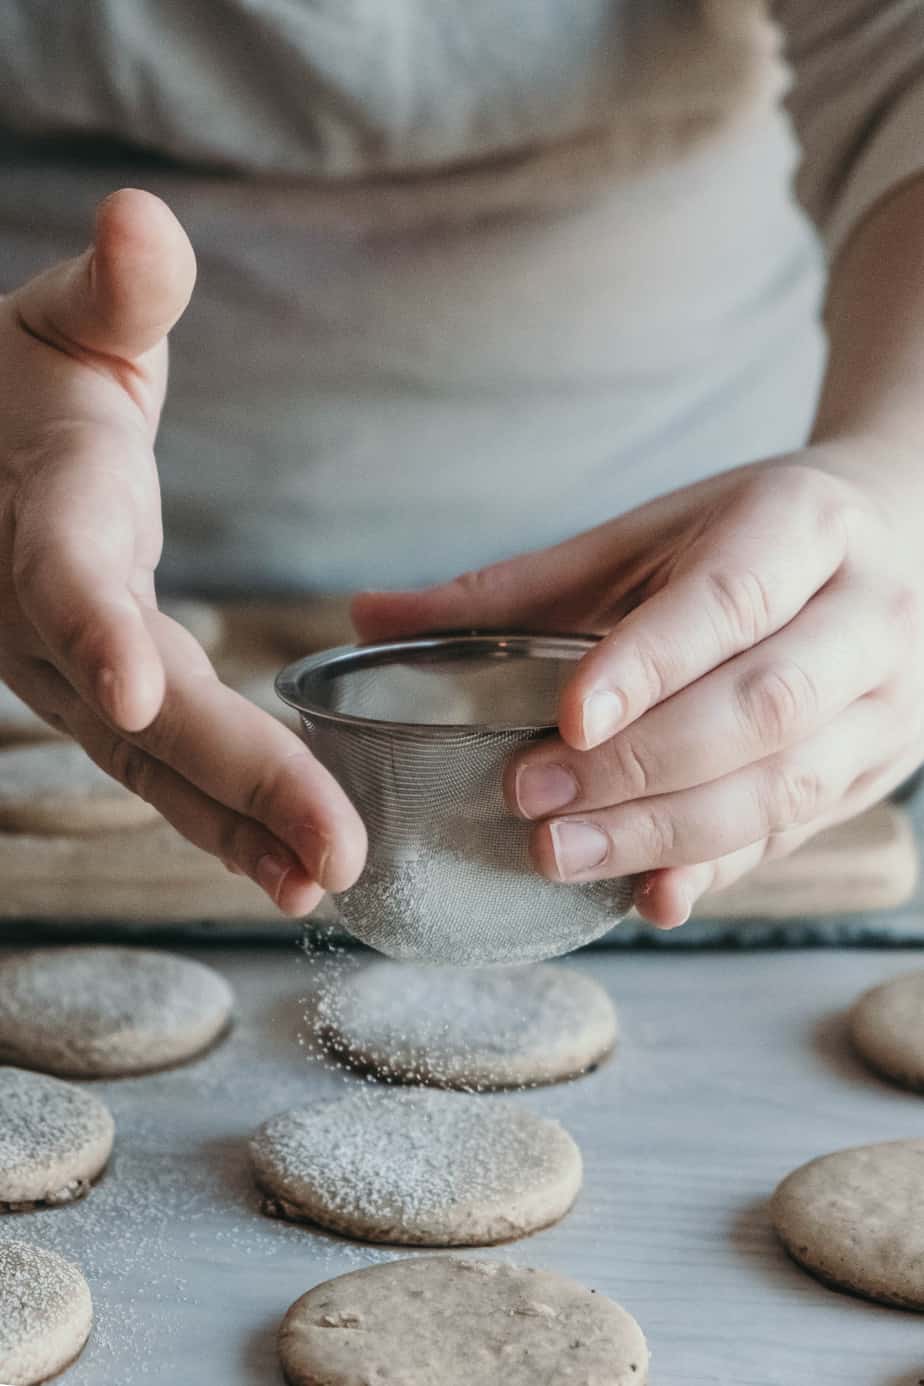 A Christmas cookie list to inspire your holiday baking.